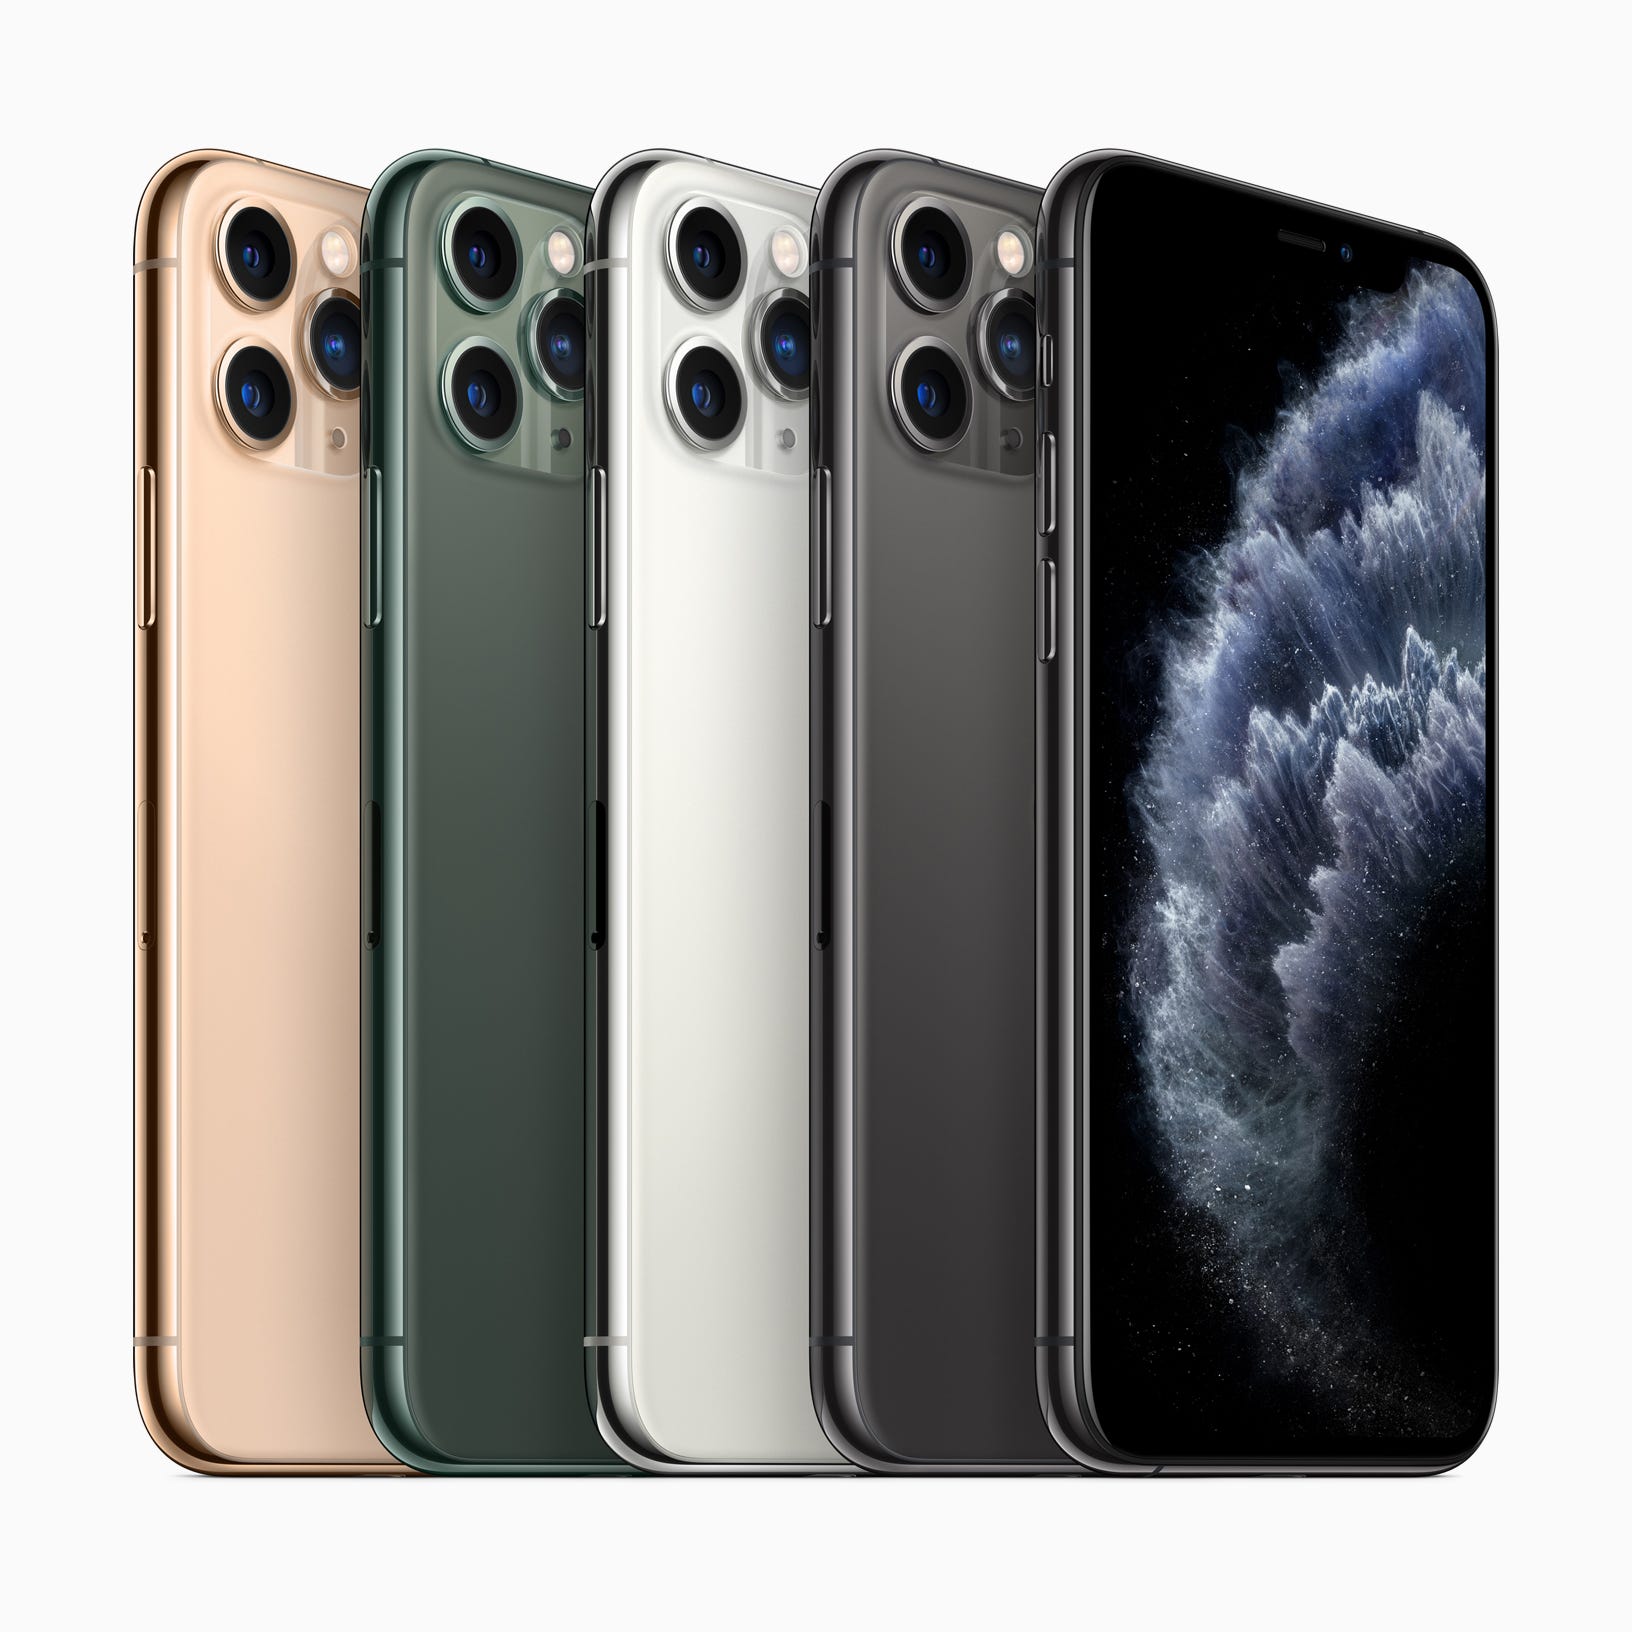 Apple's new phones start at $699, up to $1,449. Old iPhone 8 is $449